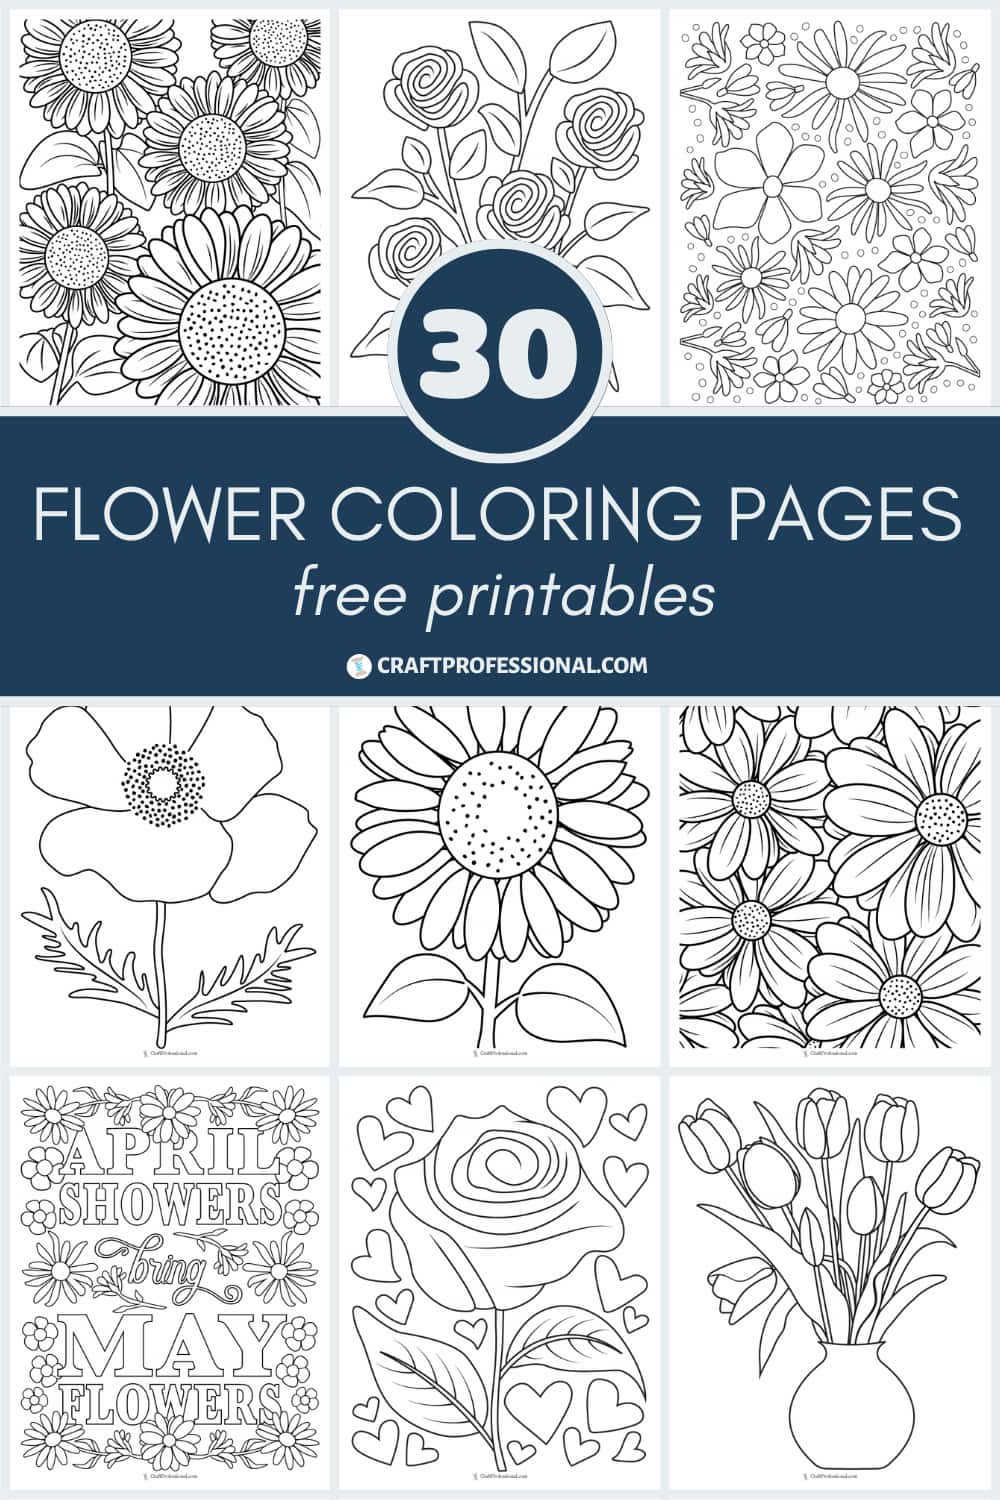 very detailed coloring pages printable